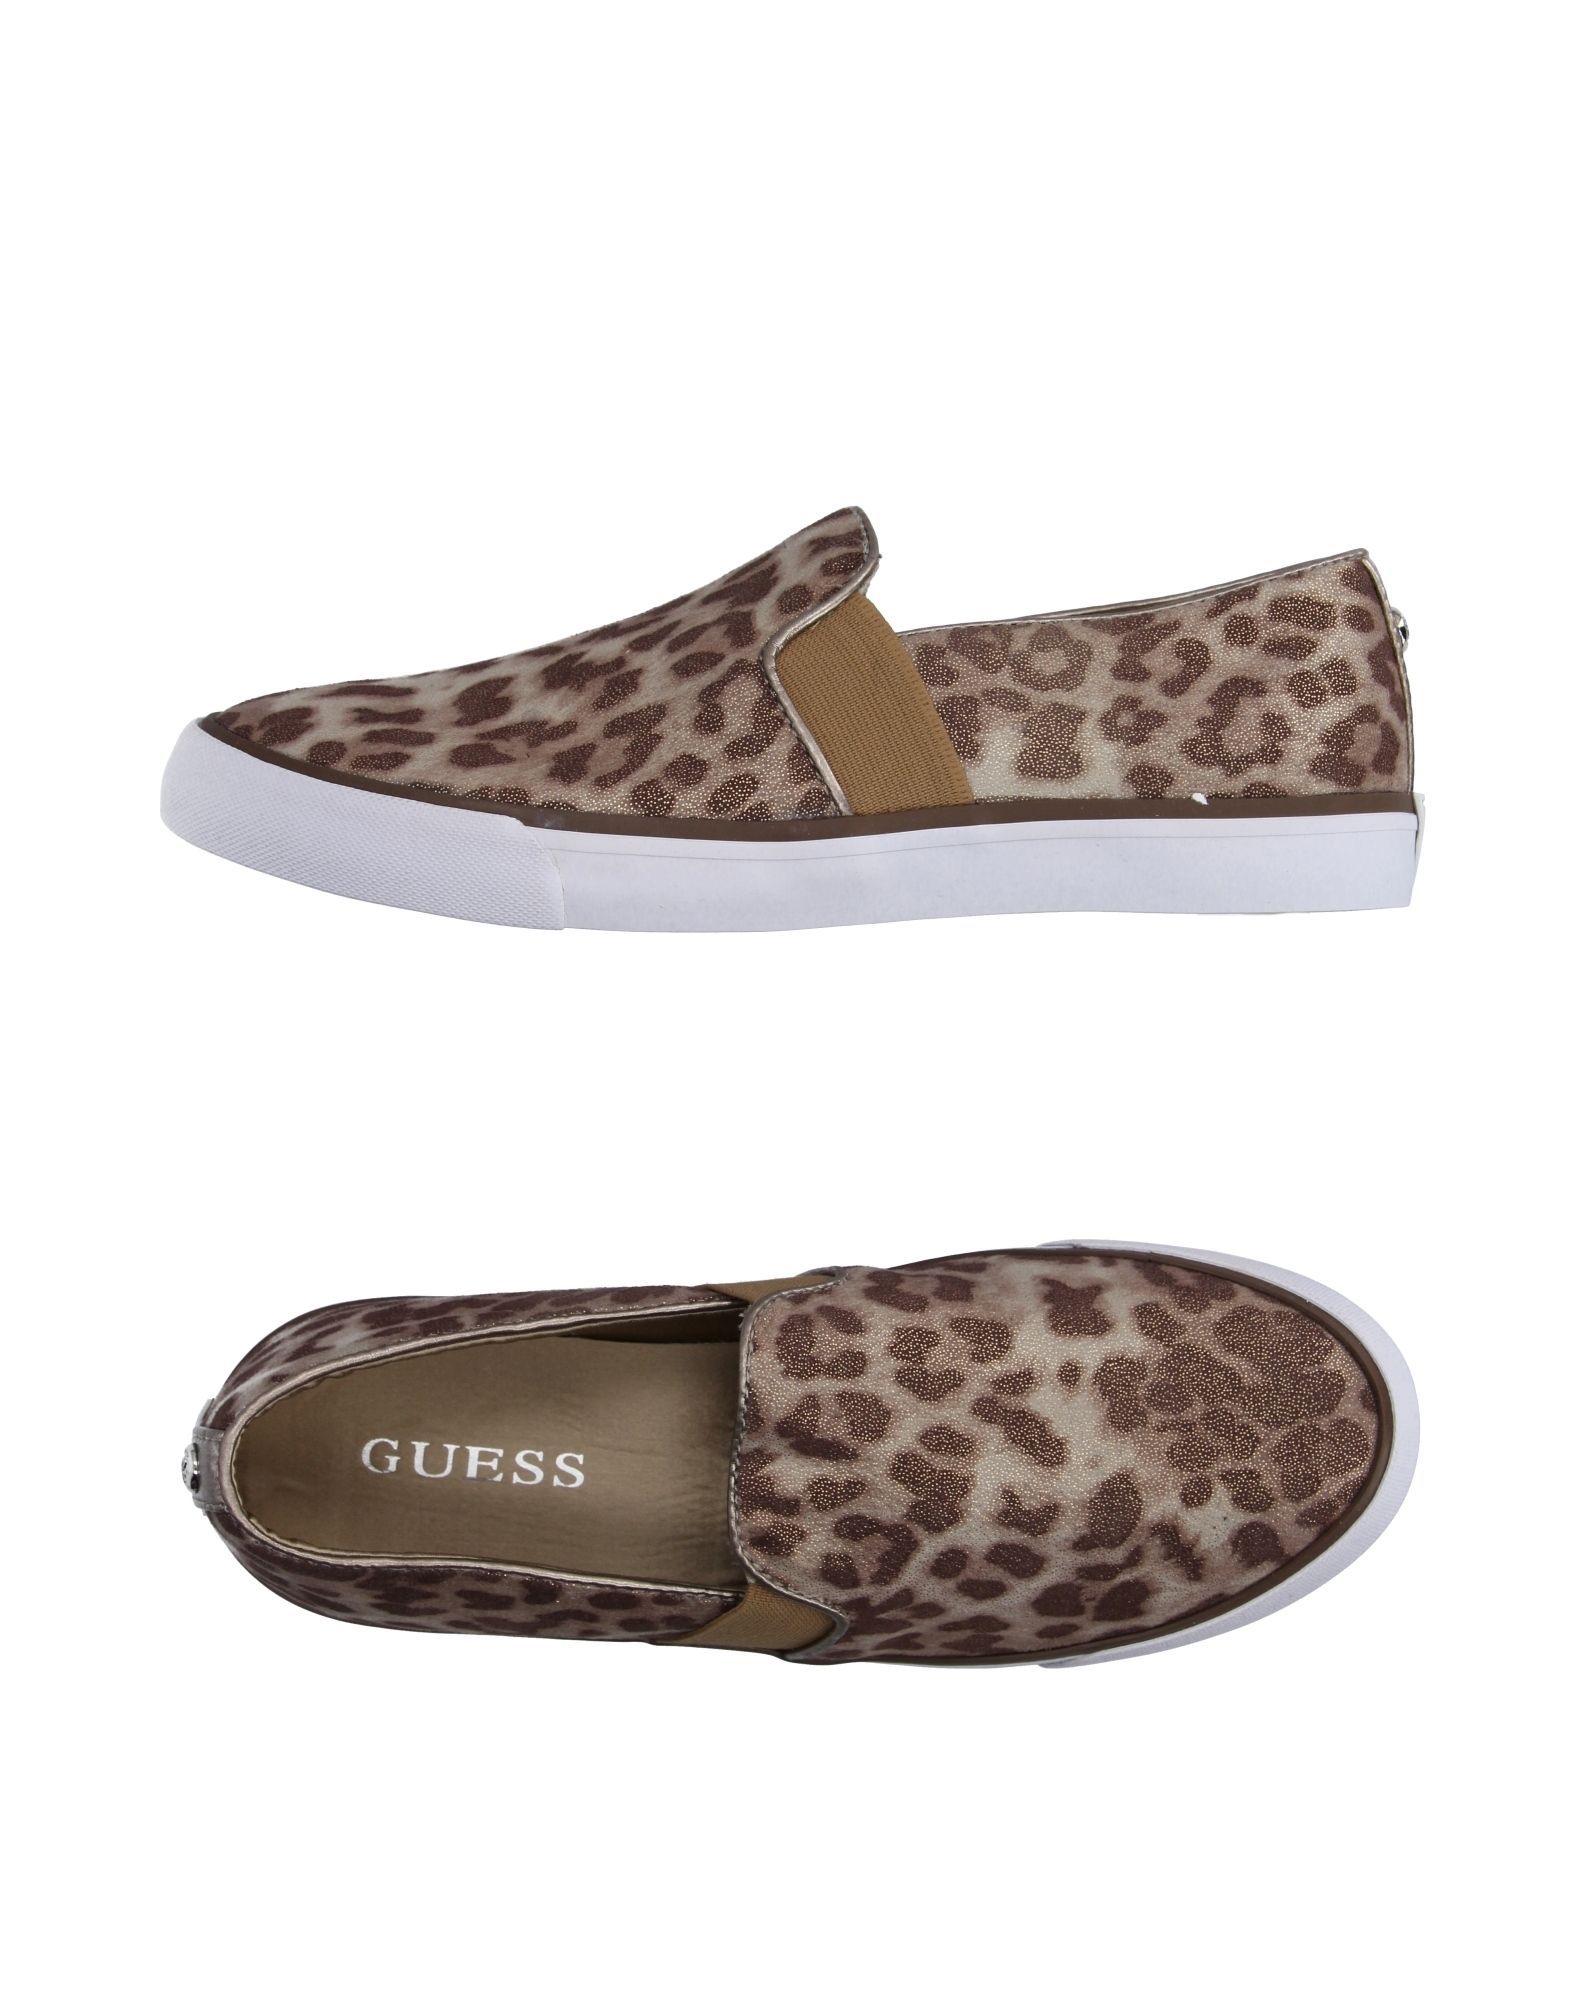 GUESS Sneakers | YOOX (US)